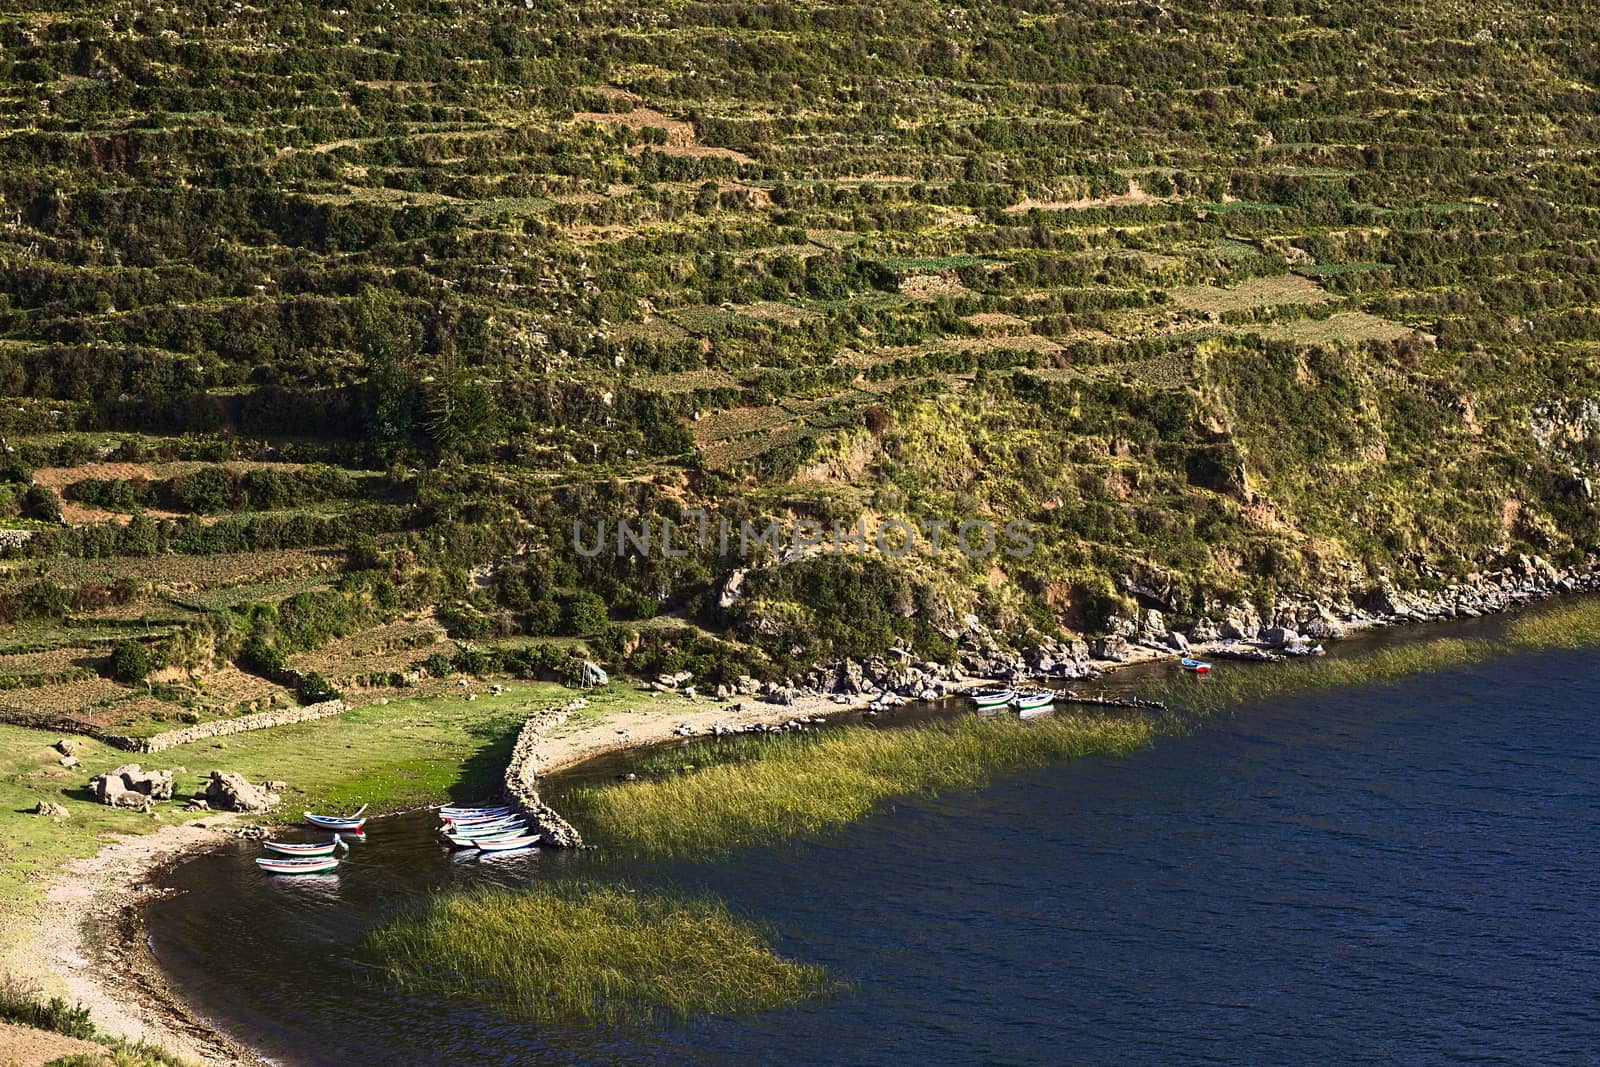 Small boats in bay and remnants of old agricultural terraces on hillside in rural landscape on the northern part of Isla del Sol (Island of the Sun) in Lake Titicaca in Bolivia